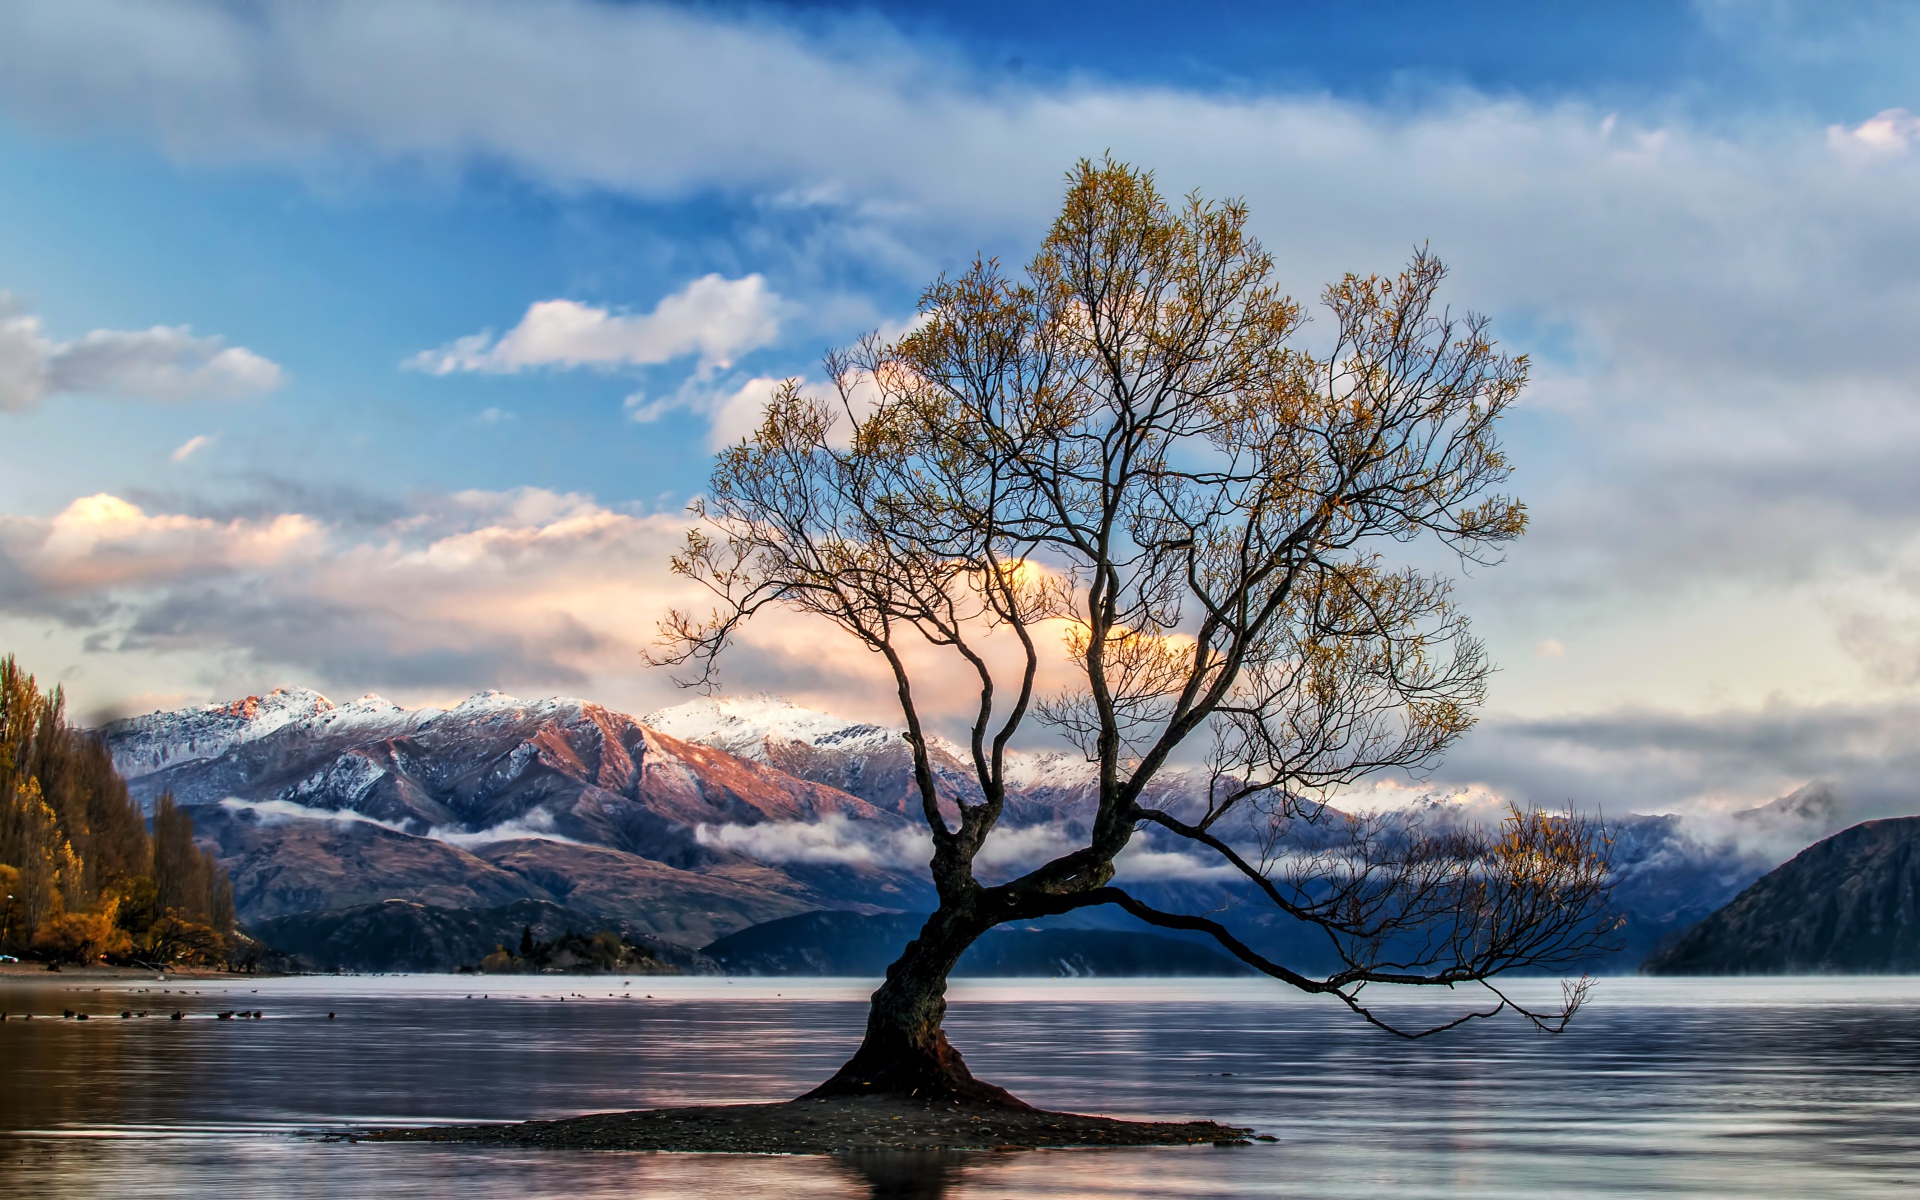 Island with a tree in the middle of the lake against the backdrop of the mountains